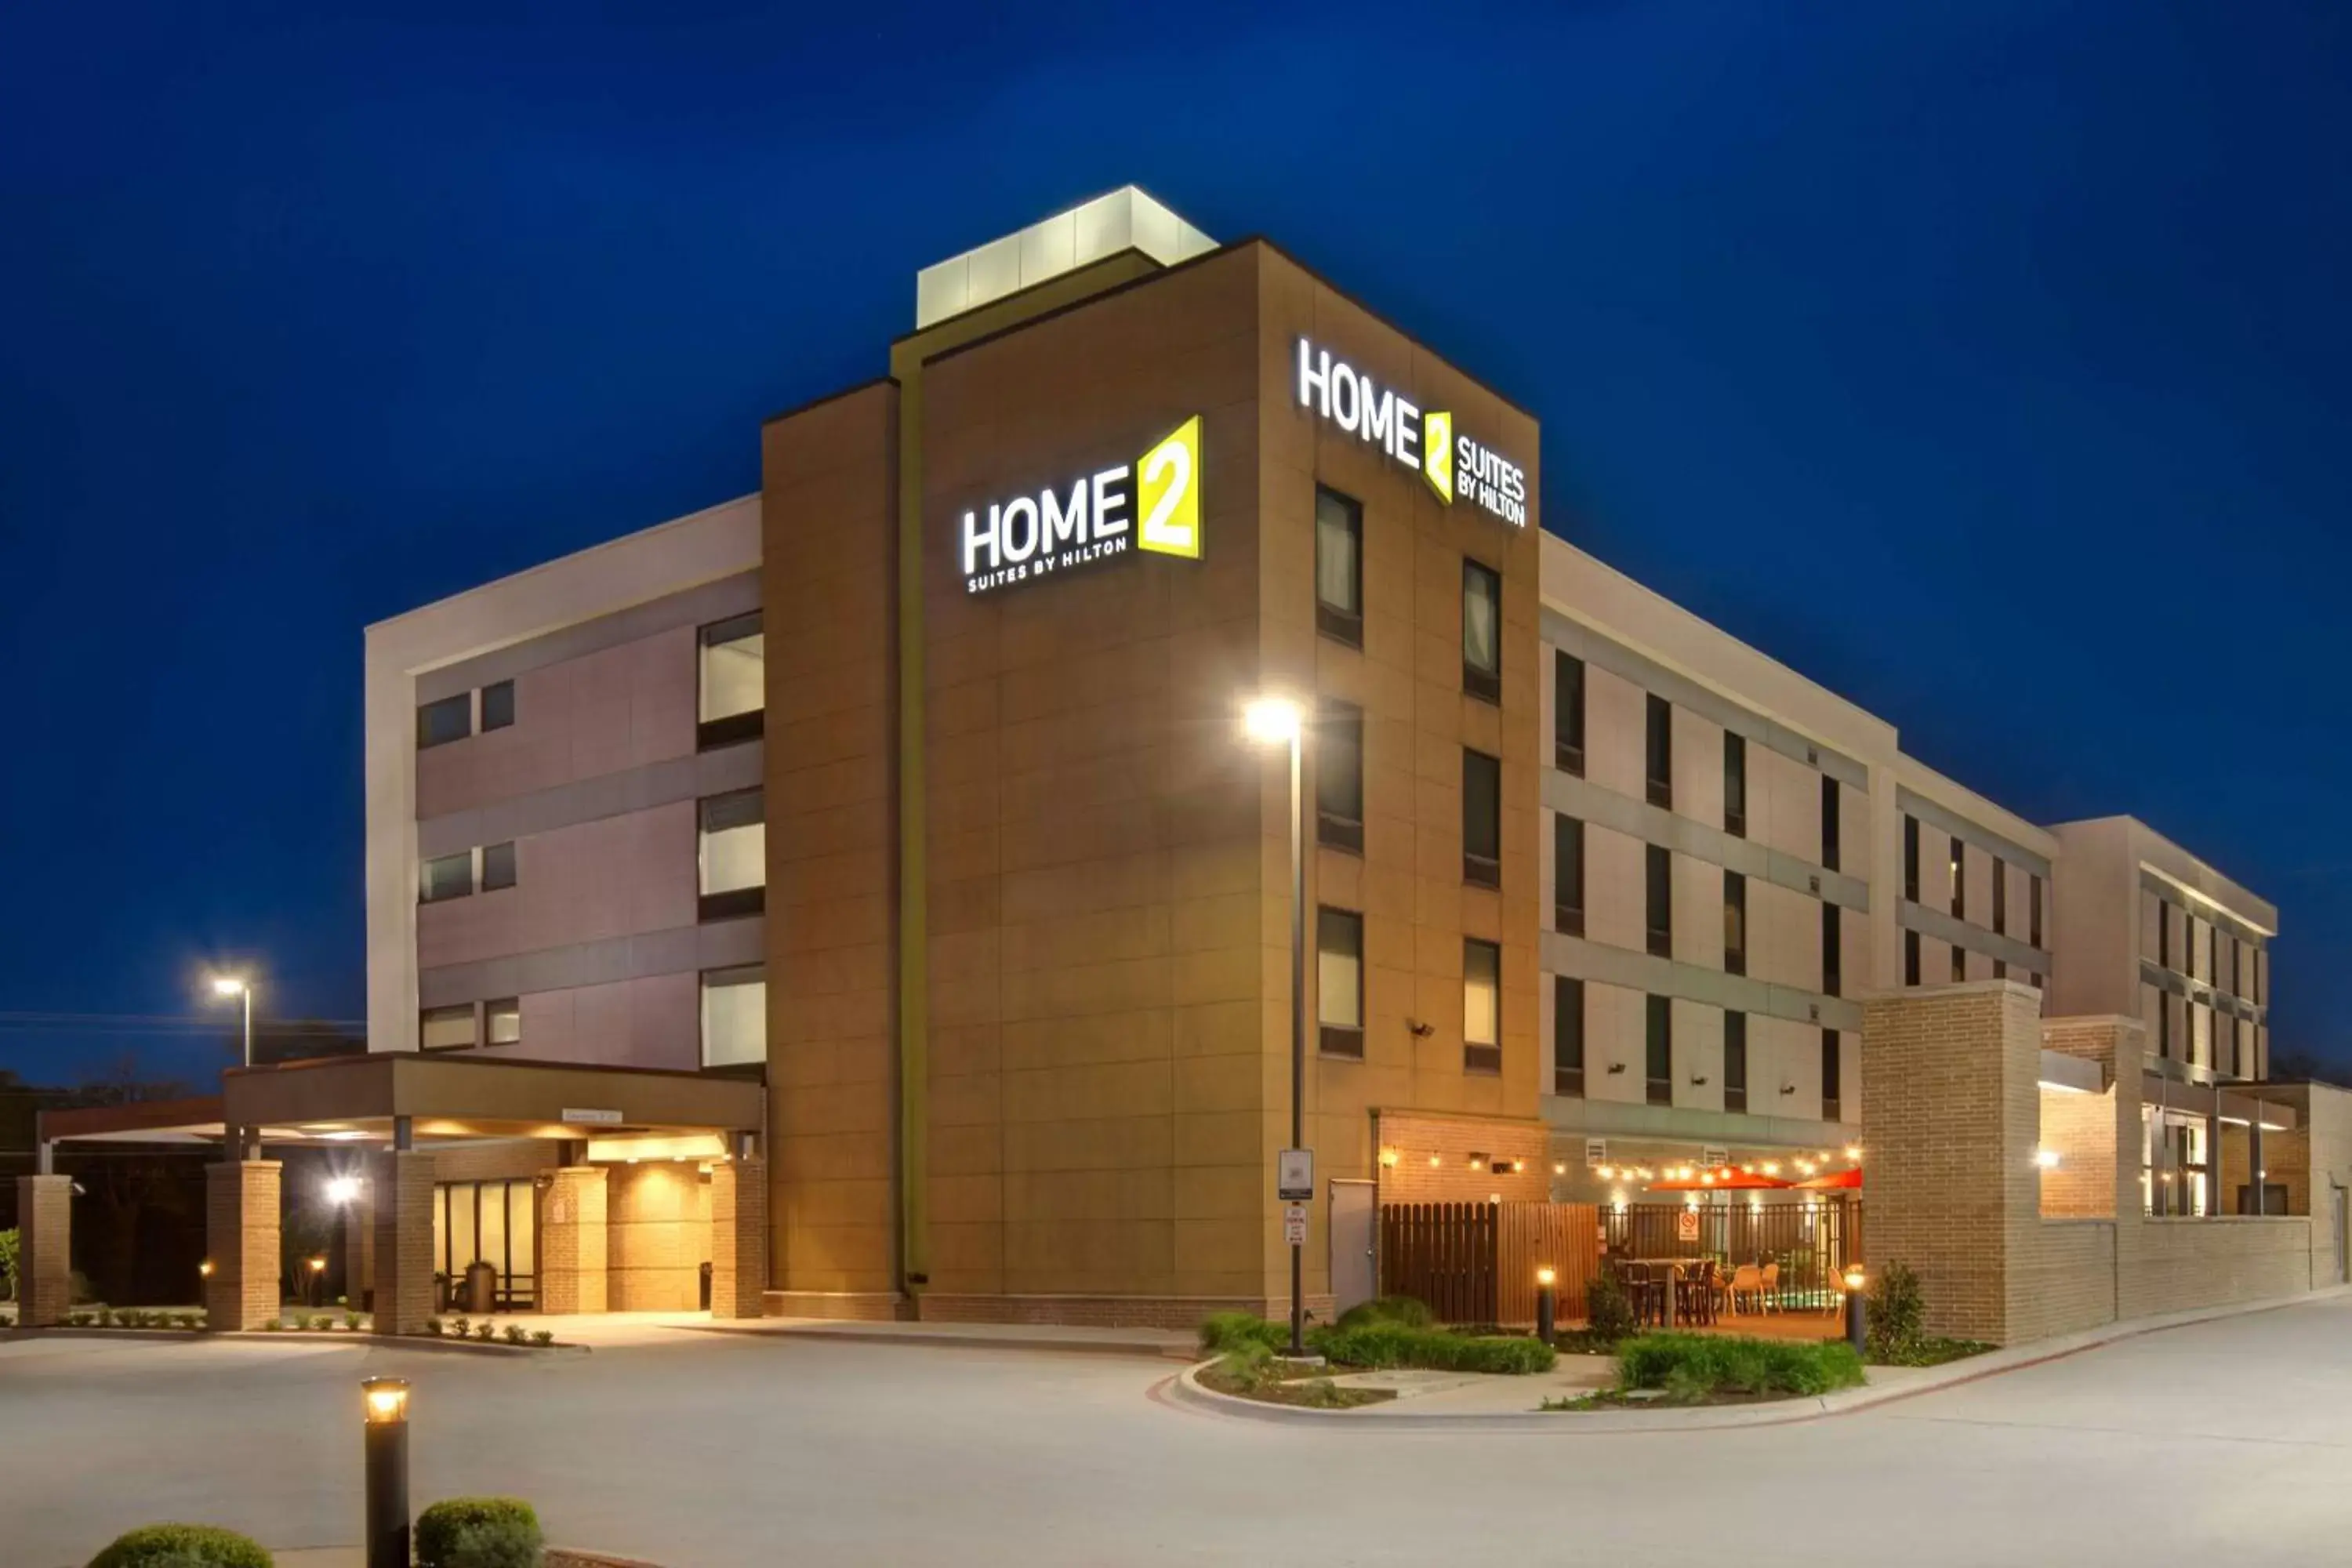 Property Building in Home2 Suites By Hilton Waco